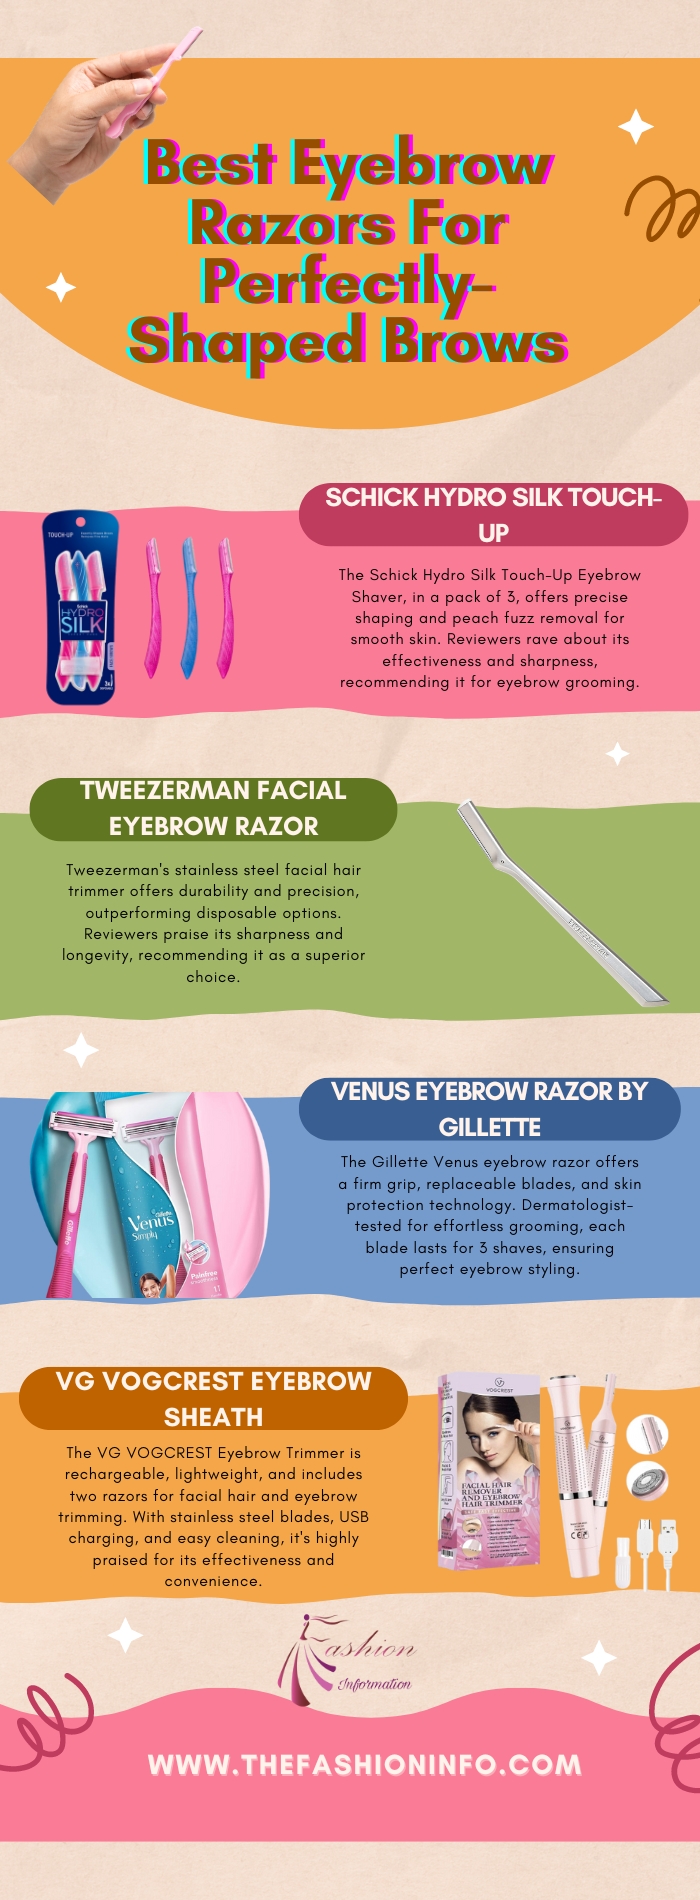 Best Eyebrow Razors For Perfectly-Shaped Brows